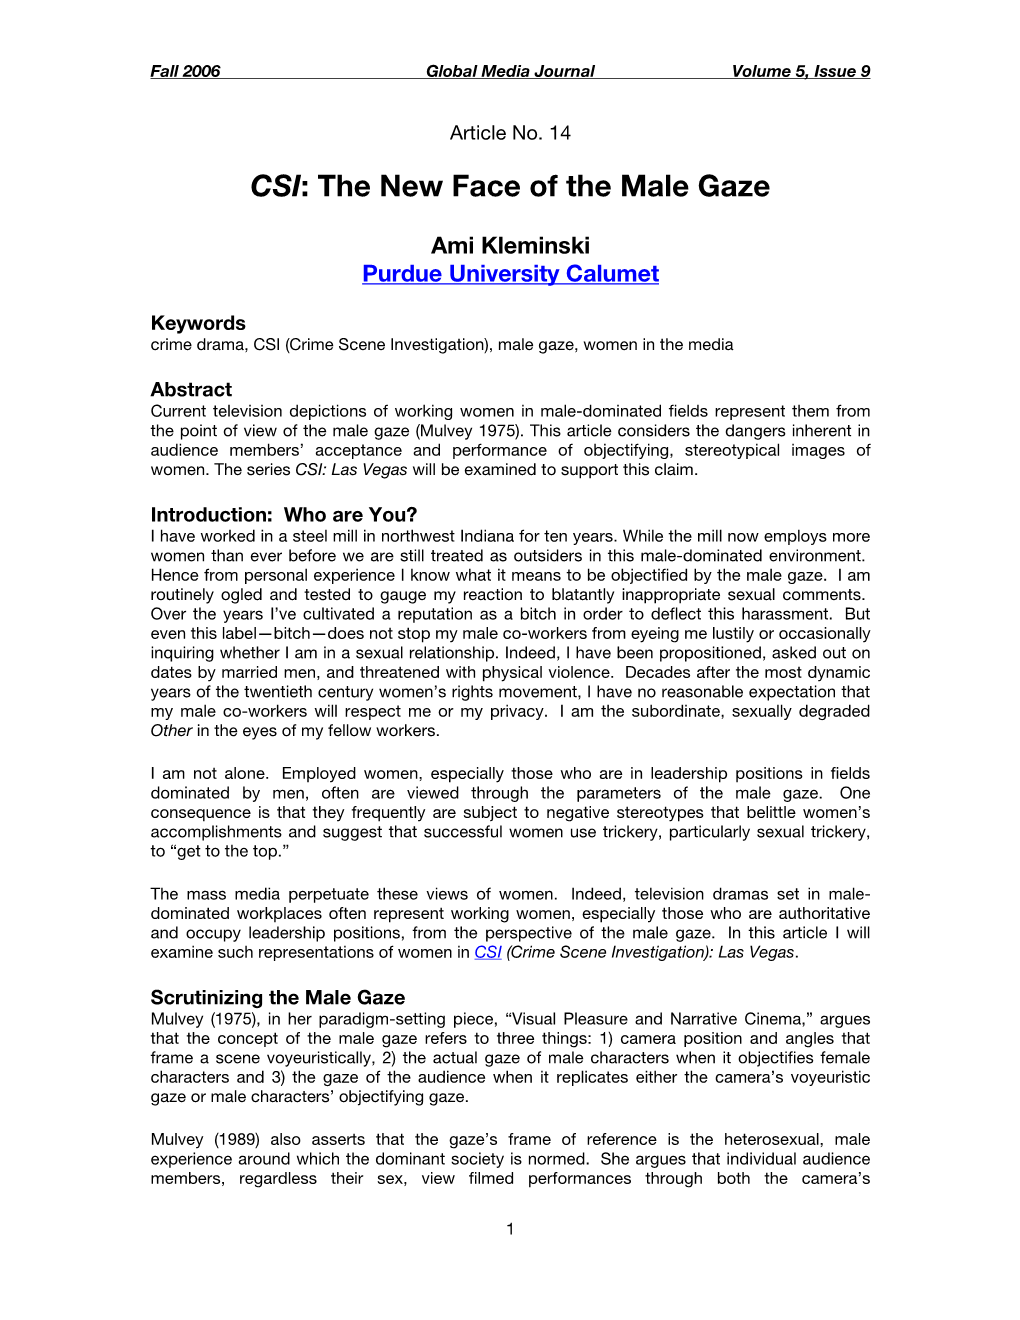 CSI: the New Face of the Male Gaze